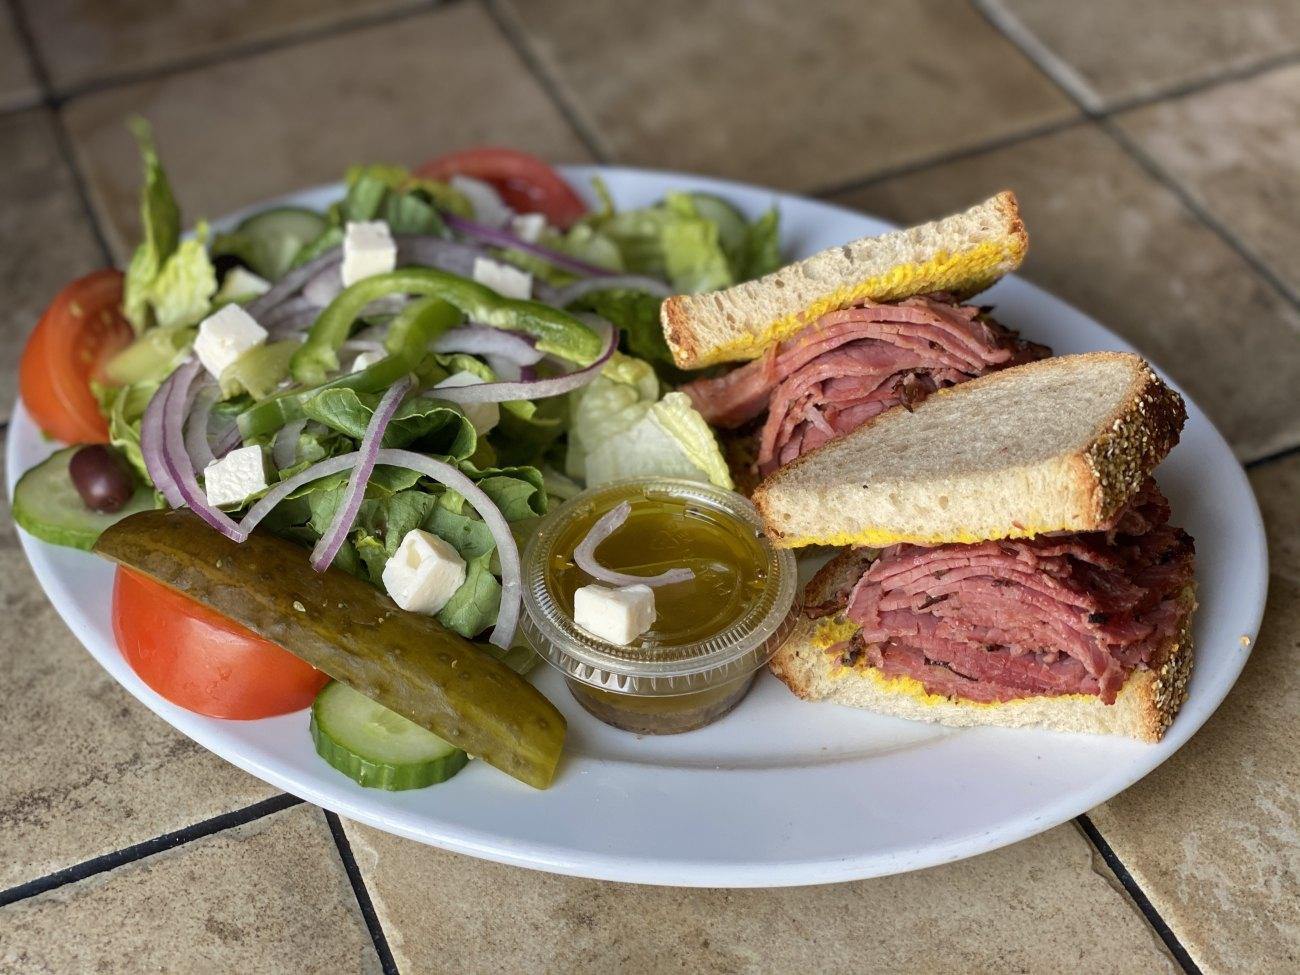 As du Smoked Meat - Restaurant Cuisine Smoked Meat L'Assomption, L'Assomption